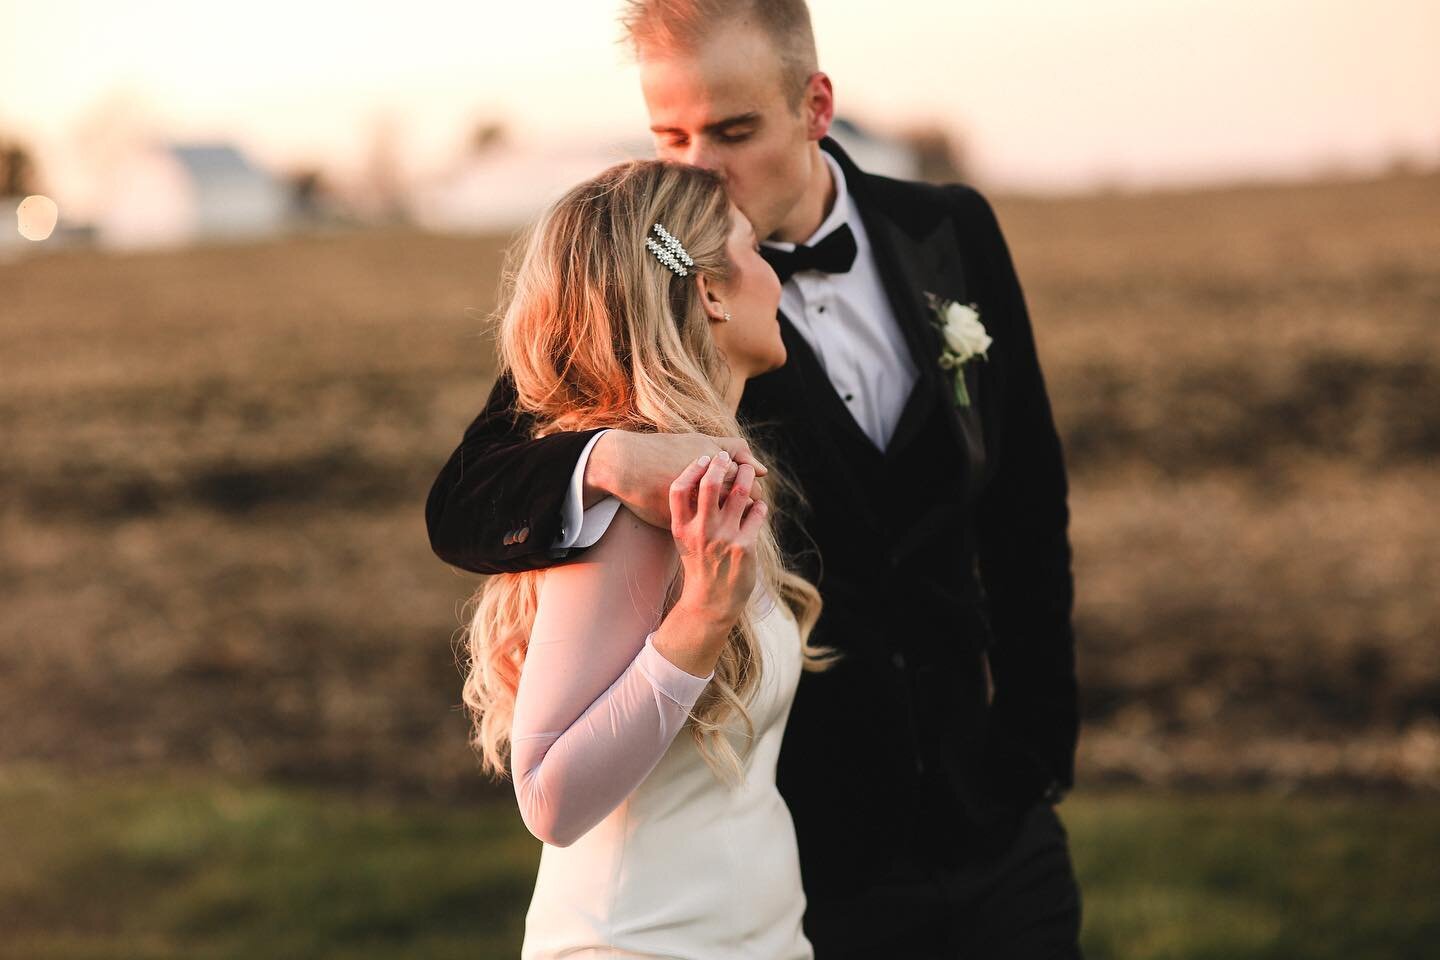 I&rsquo;m just gonna leave these here. These images are pretty much what we are going for with every couple! Real. Authentic. Intimate. Fun. Whimsical. Spontaneous. Timeless. 

Come hang out with us tomorrow night from 6pm-9pm at Haven on the Farm. T